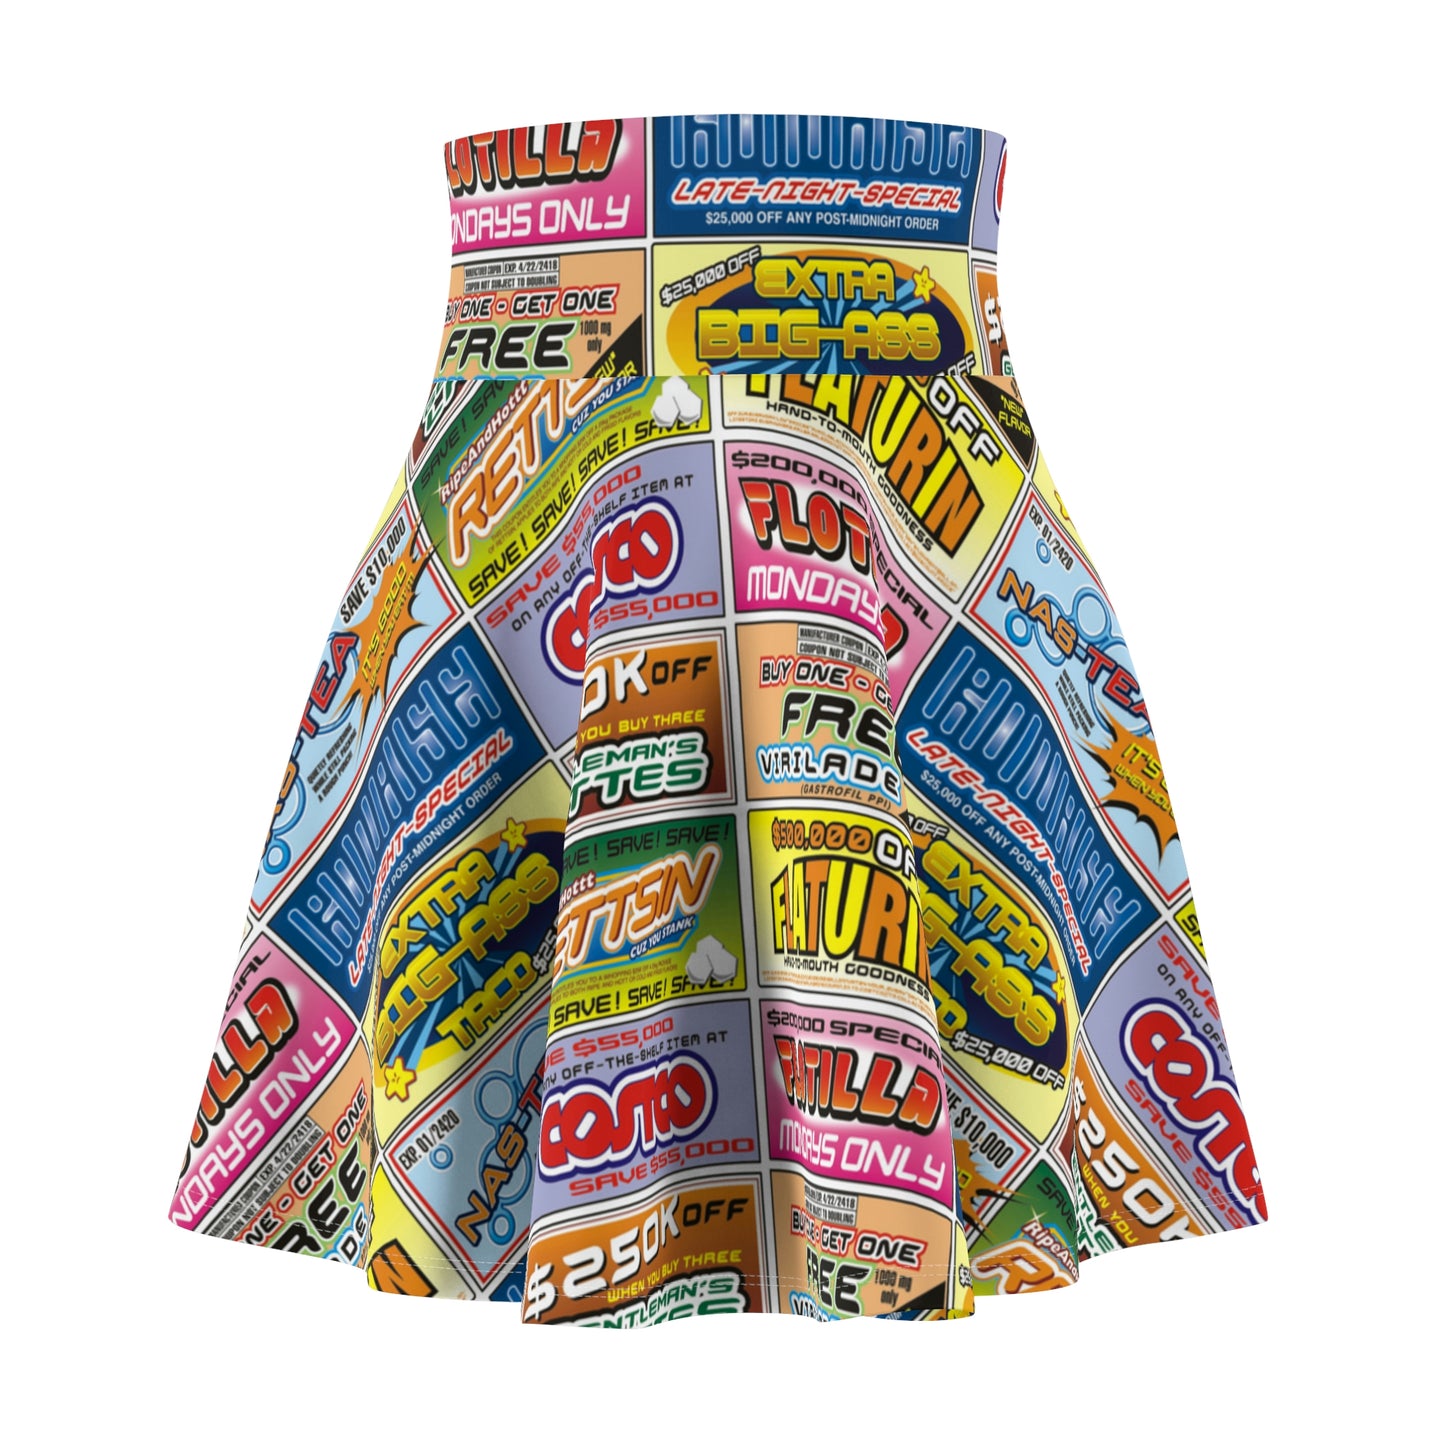 Idiocracy Inspired Women's Skater Skirt Lord and Lady Towers